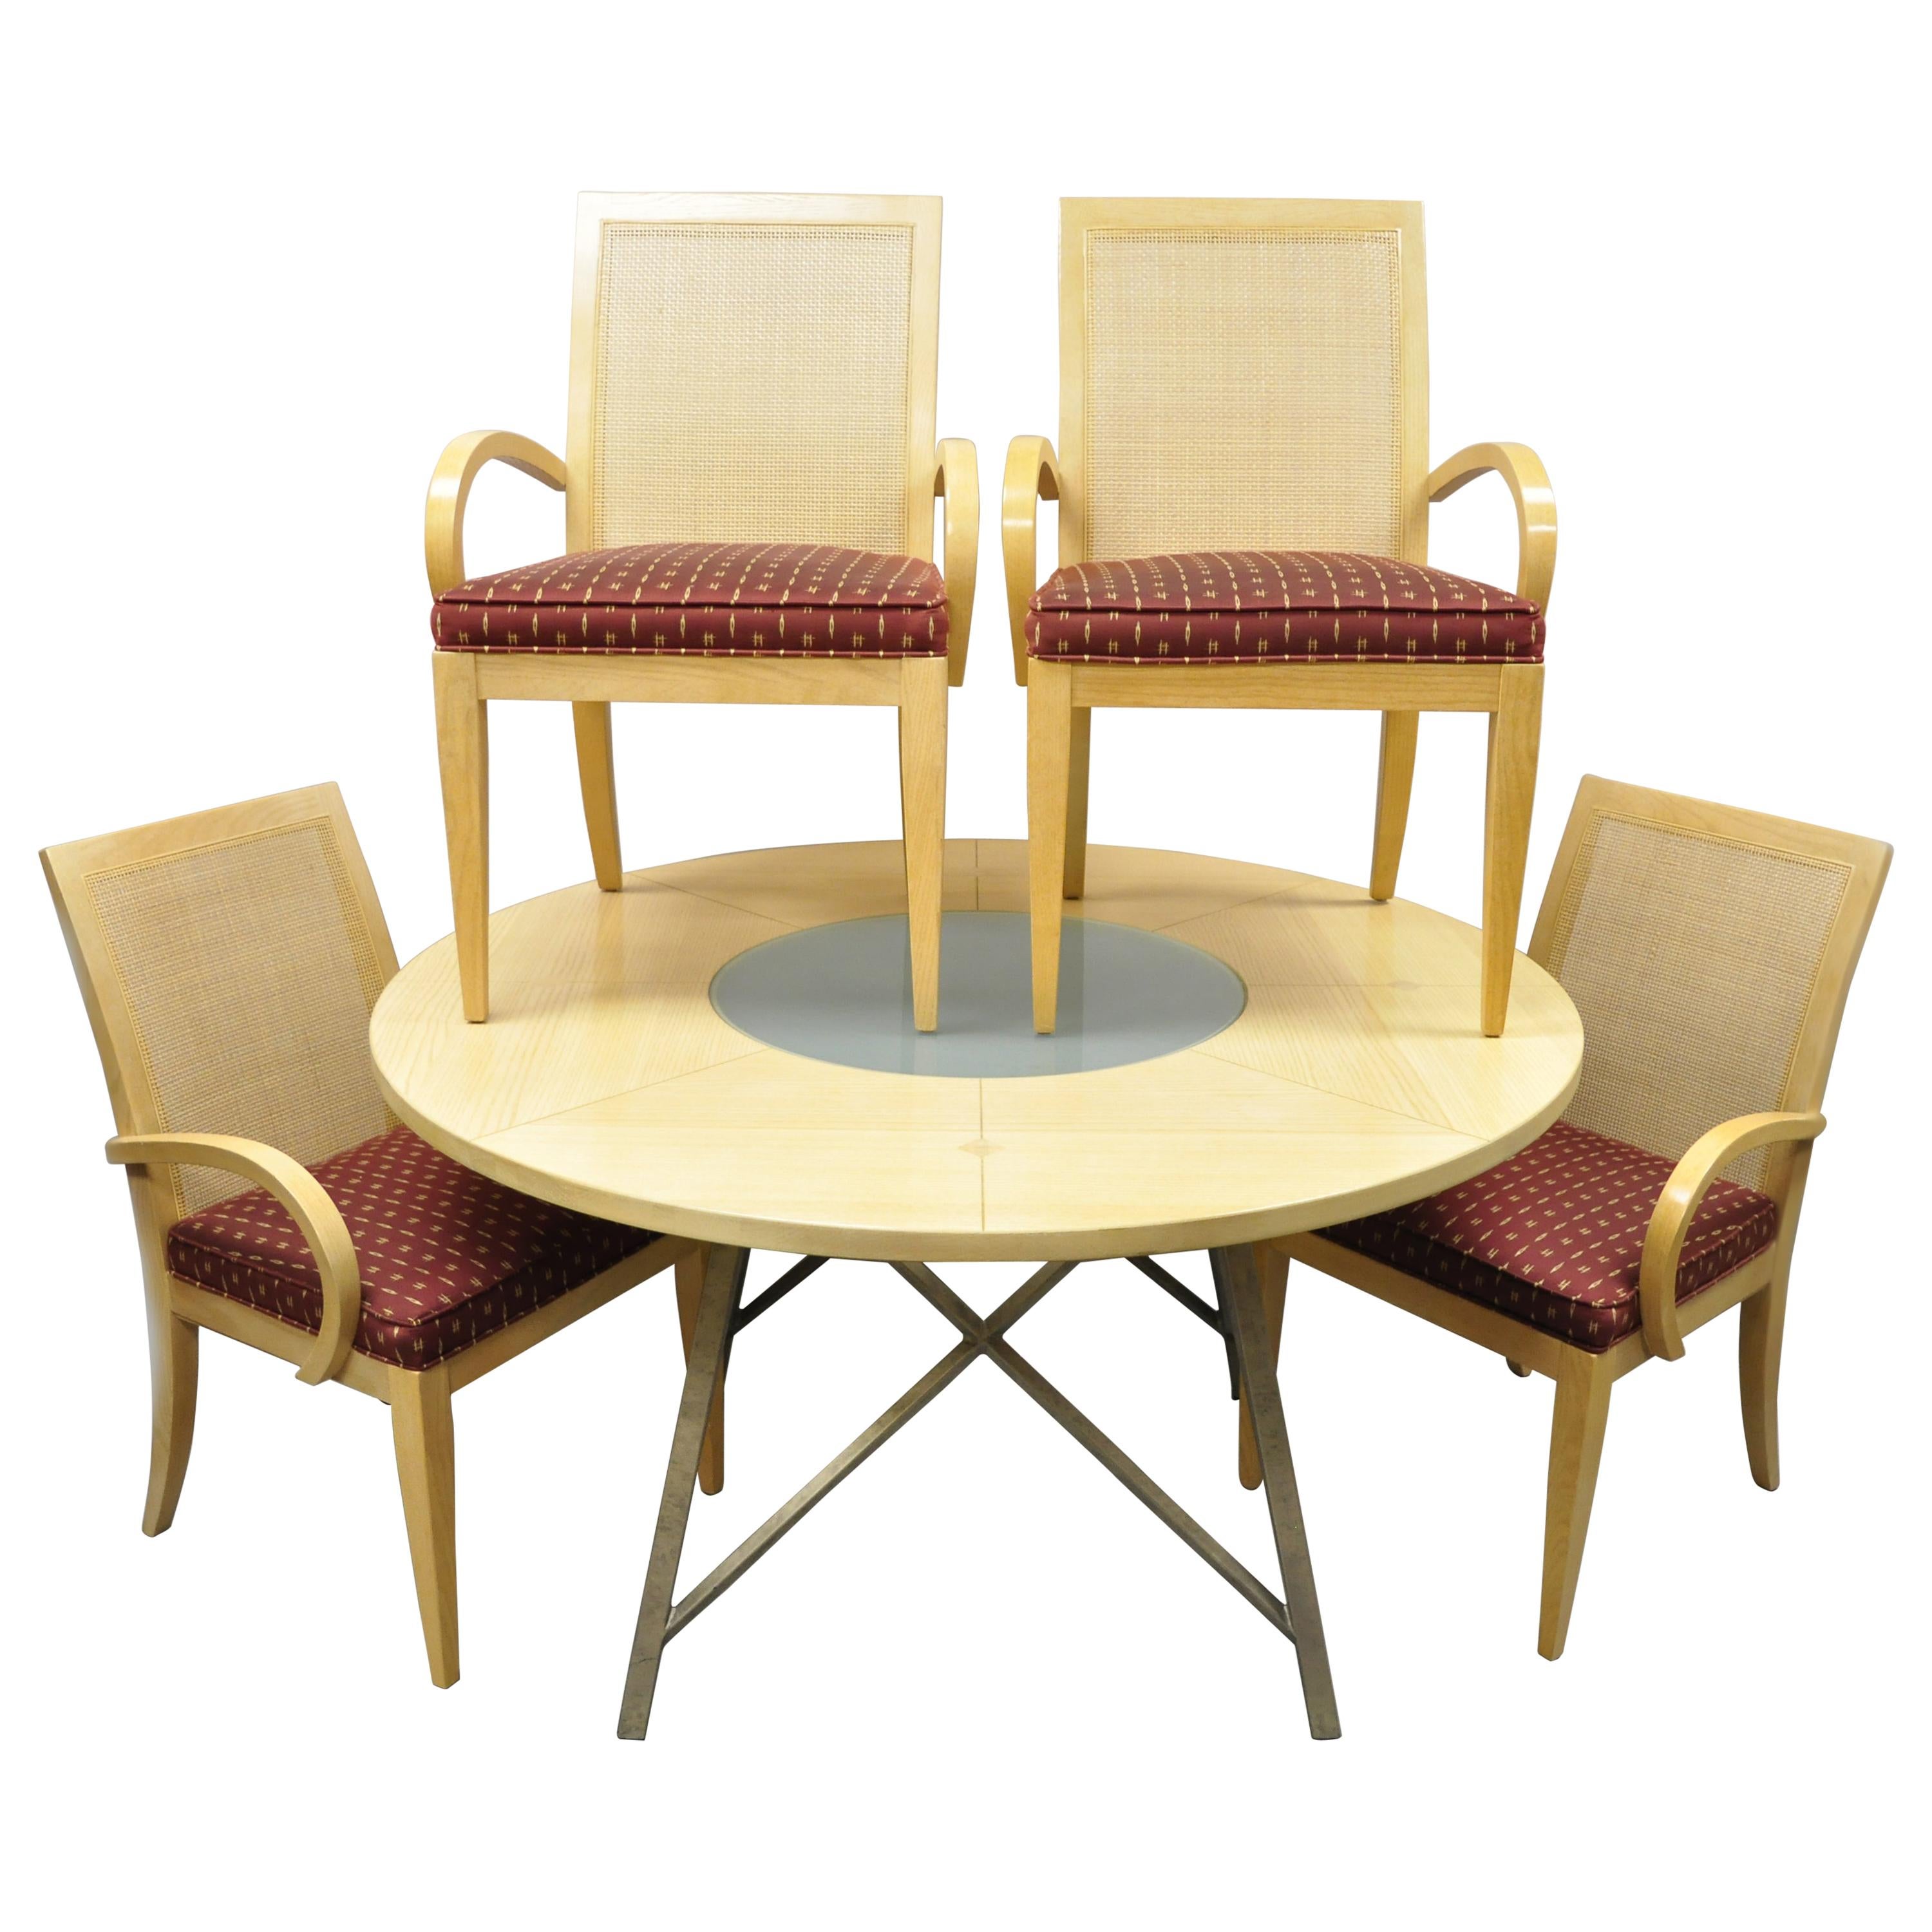 Drexel Heritage Studio Contemporary Modern Blonde Wood Dining Set Table 4 Chairs For Sale